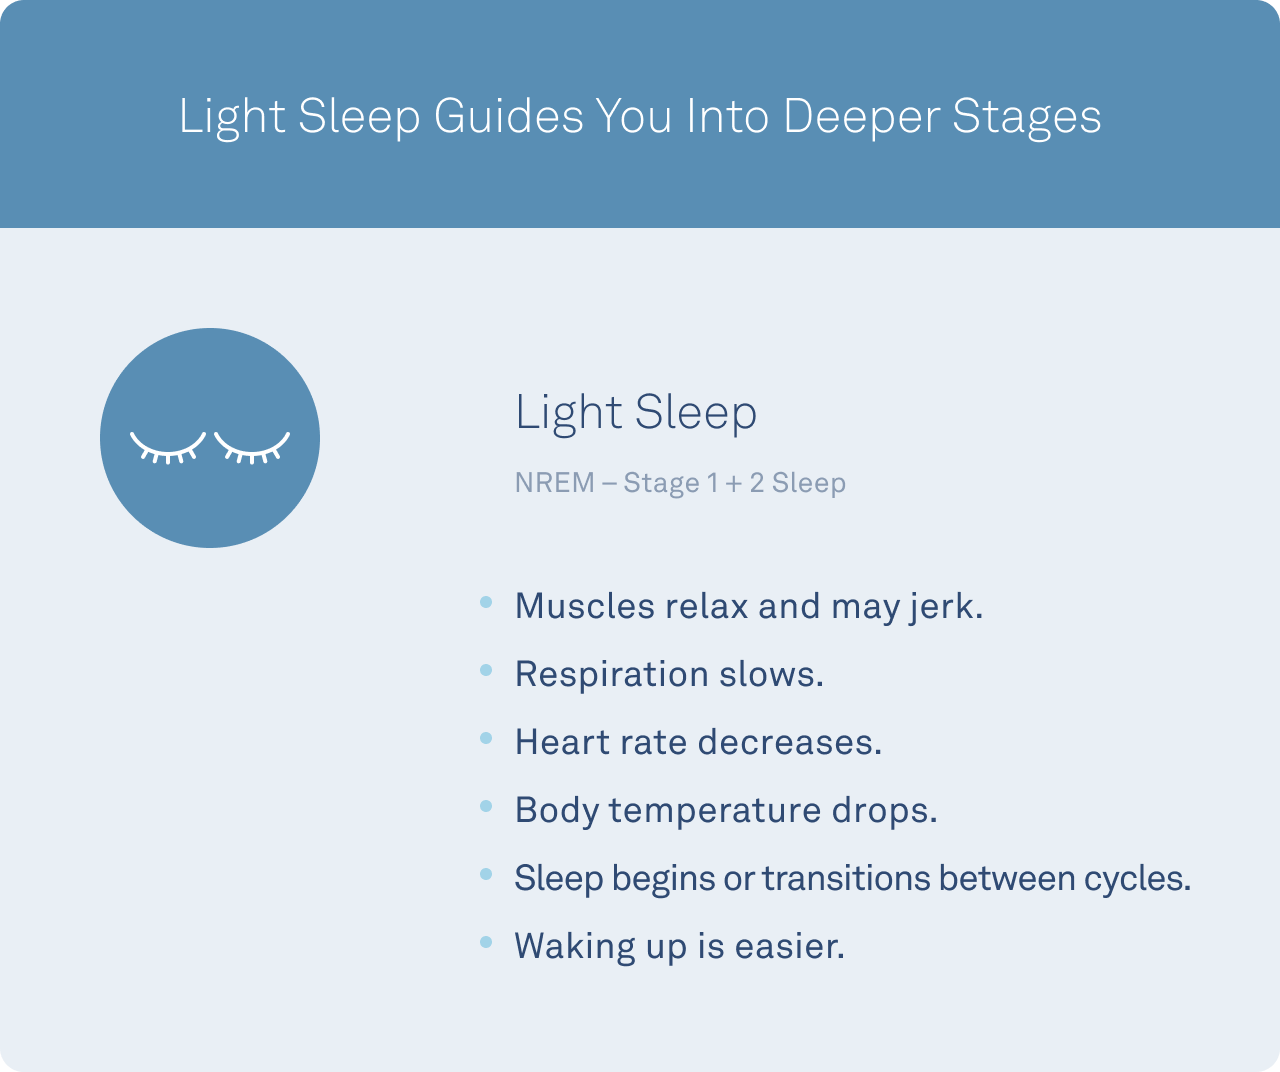 During light sleep, your respiration slows, your heart rate decreases, your body temperature drops and waking up is easier.